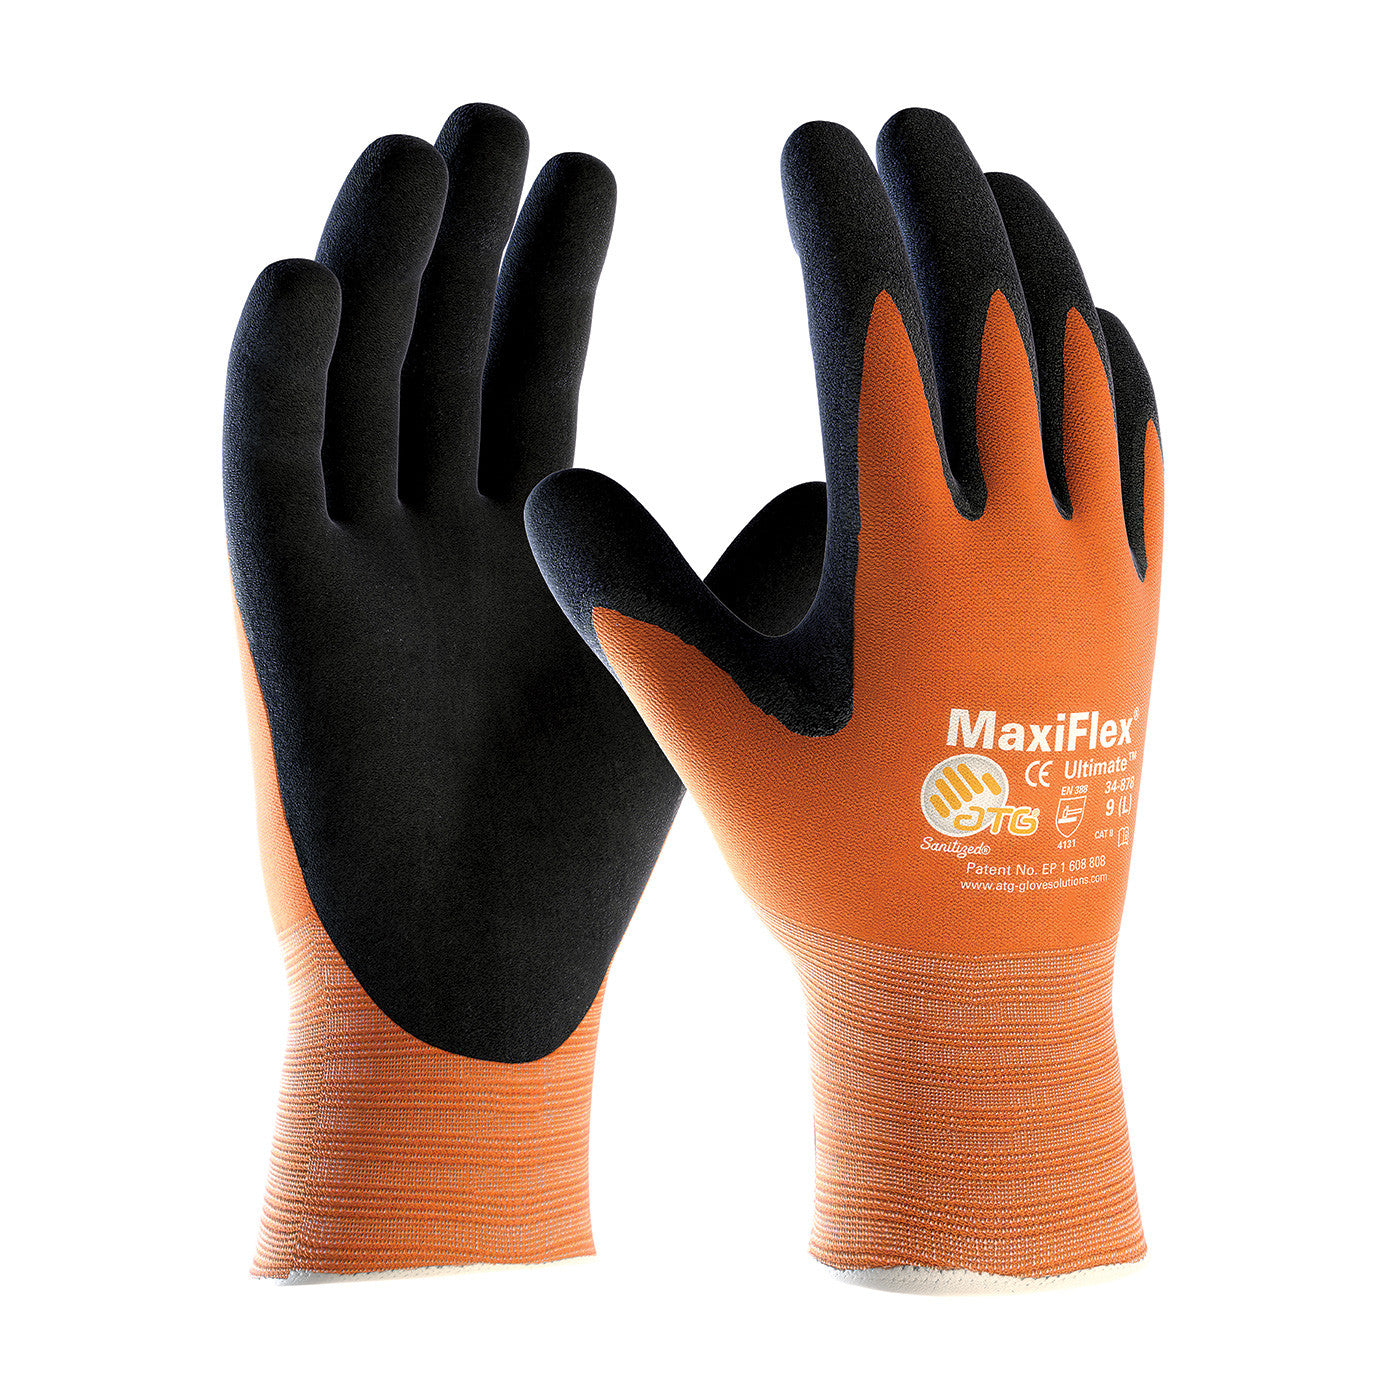 http://www.yourglovesource.com/cdn/shop/articles/34-8014_Hi-Vis_Orange_Seamless_Knit_Nylon_Glove_with_Nitrile_Coated_By_MaxiFlex_Ultimate.jpg?v=1485732148